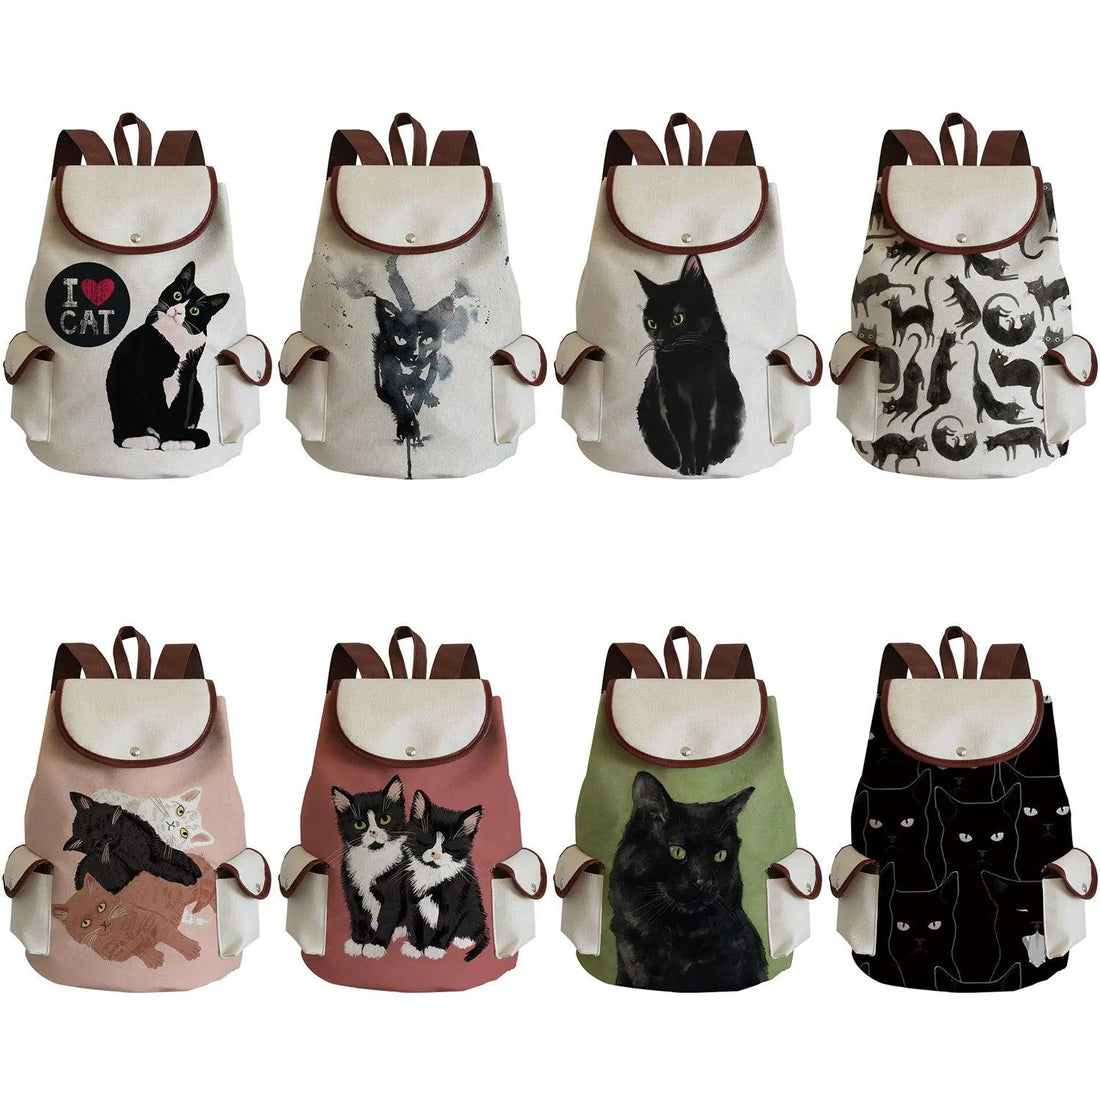 Various Black Cat Printed Backpacks, 30 Designs - Just Cats - Gifts for Cat Lovers